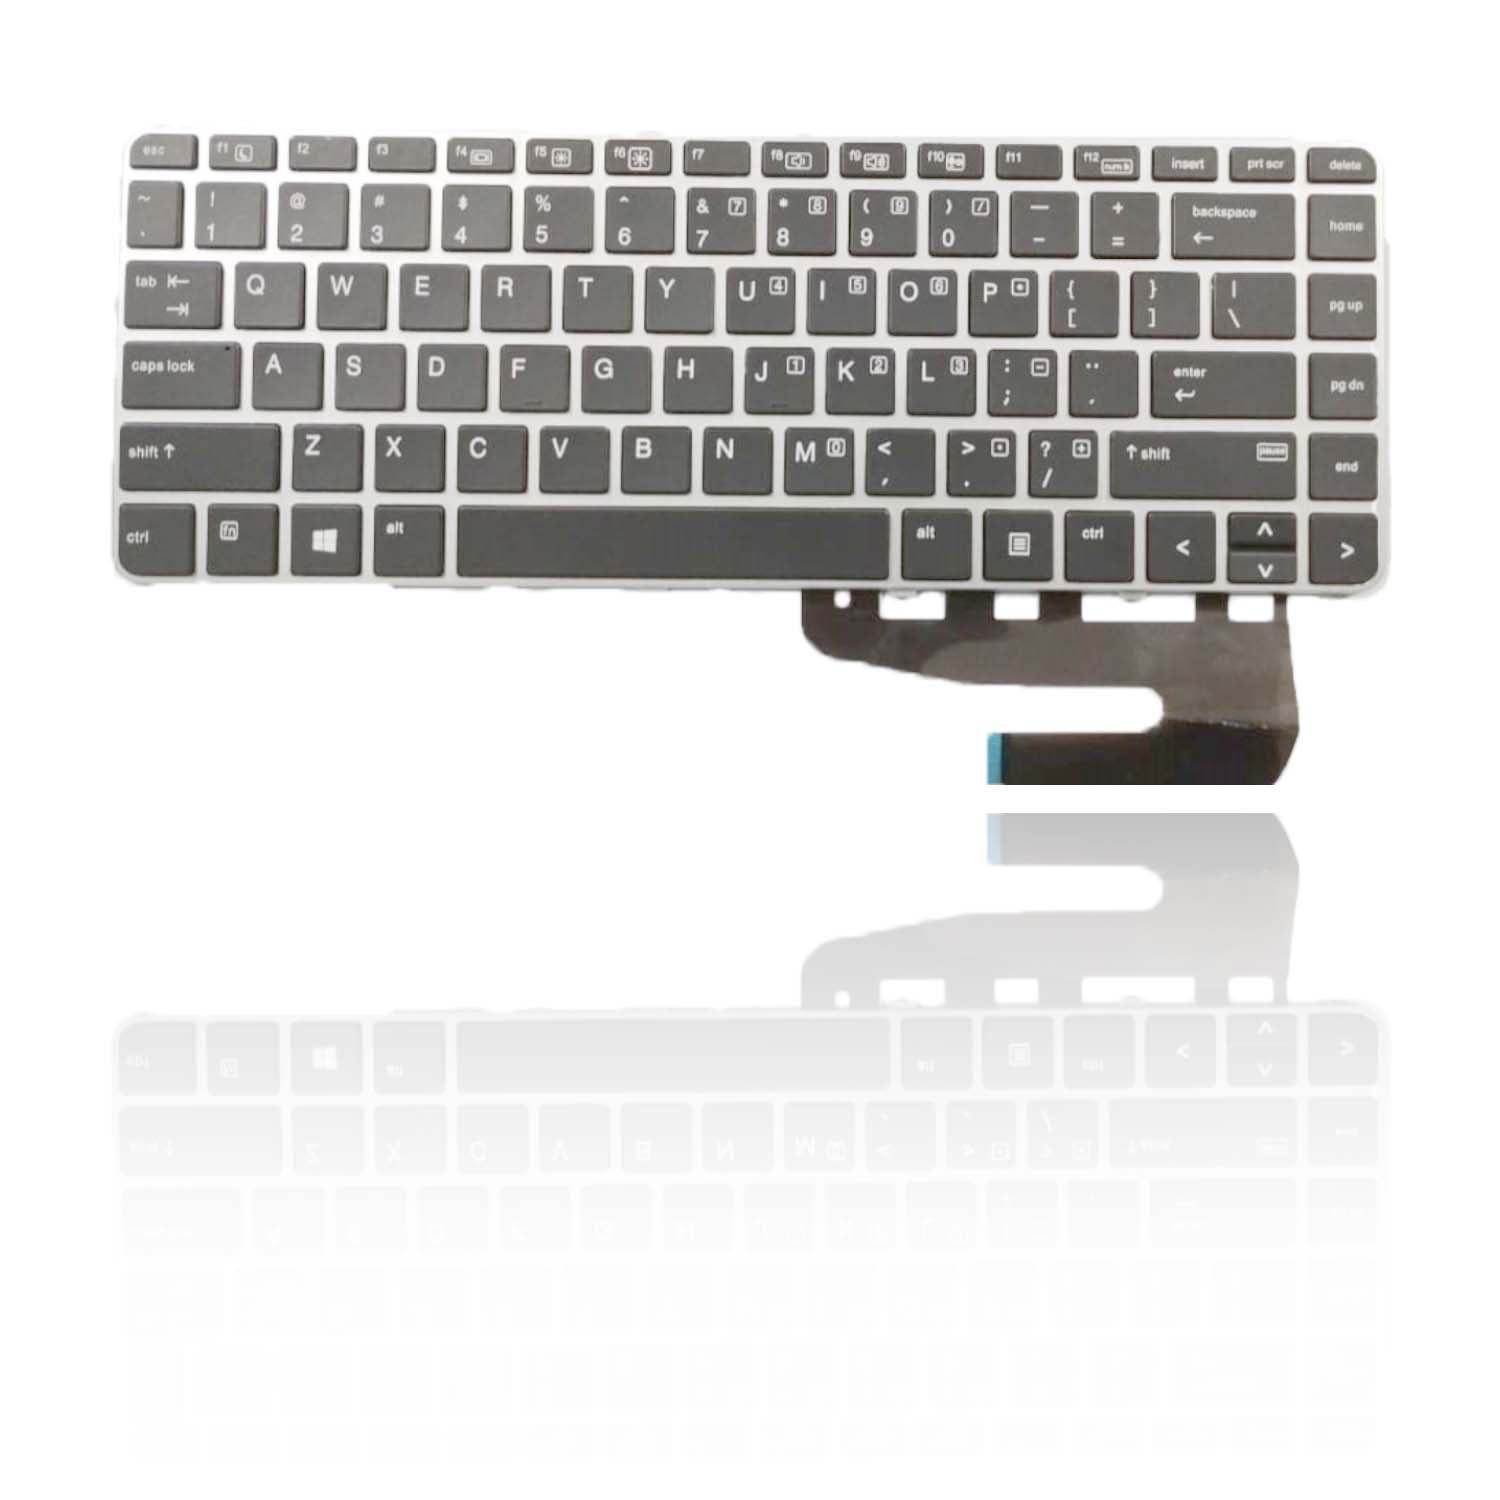 Replacement Backlit Laptop Keyboard for HP 840 G3 and 745 G3 Series SG-80400-XUA 6037B0113301